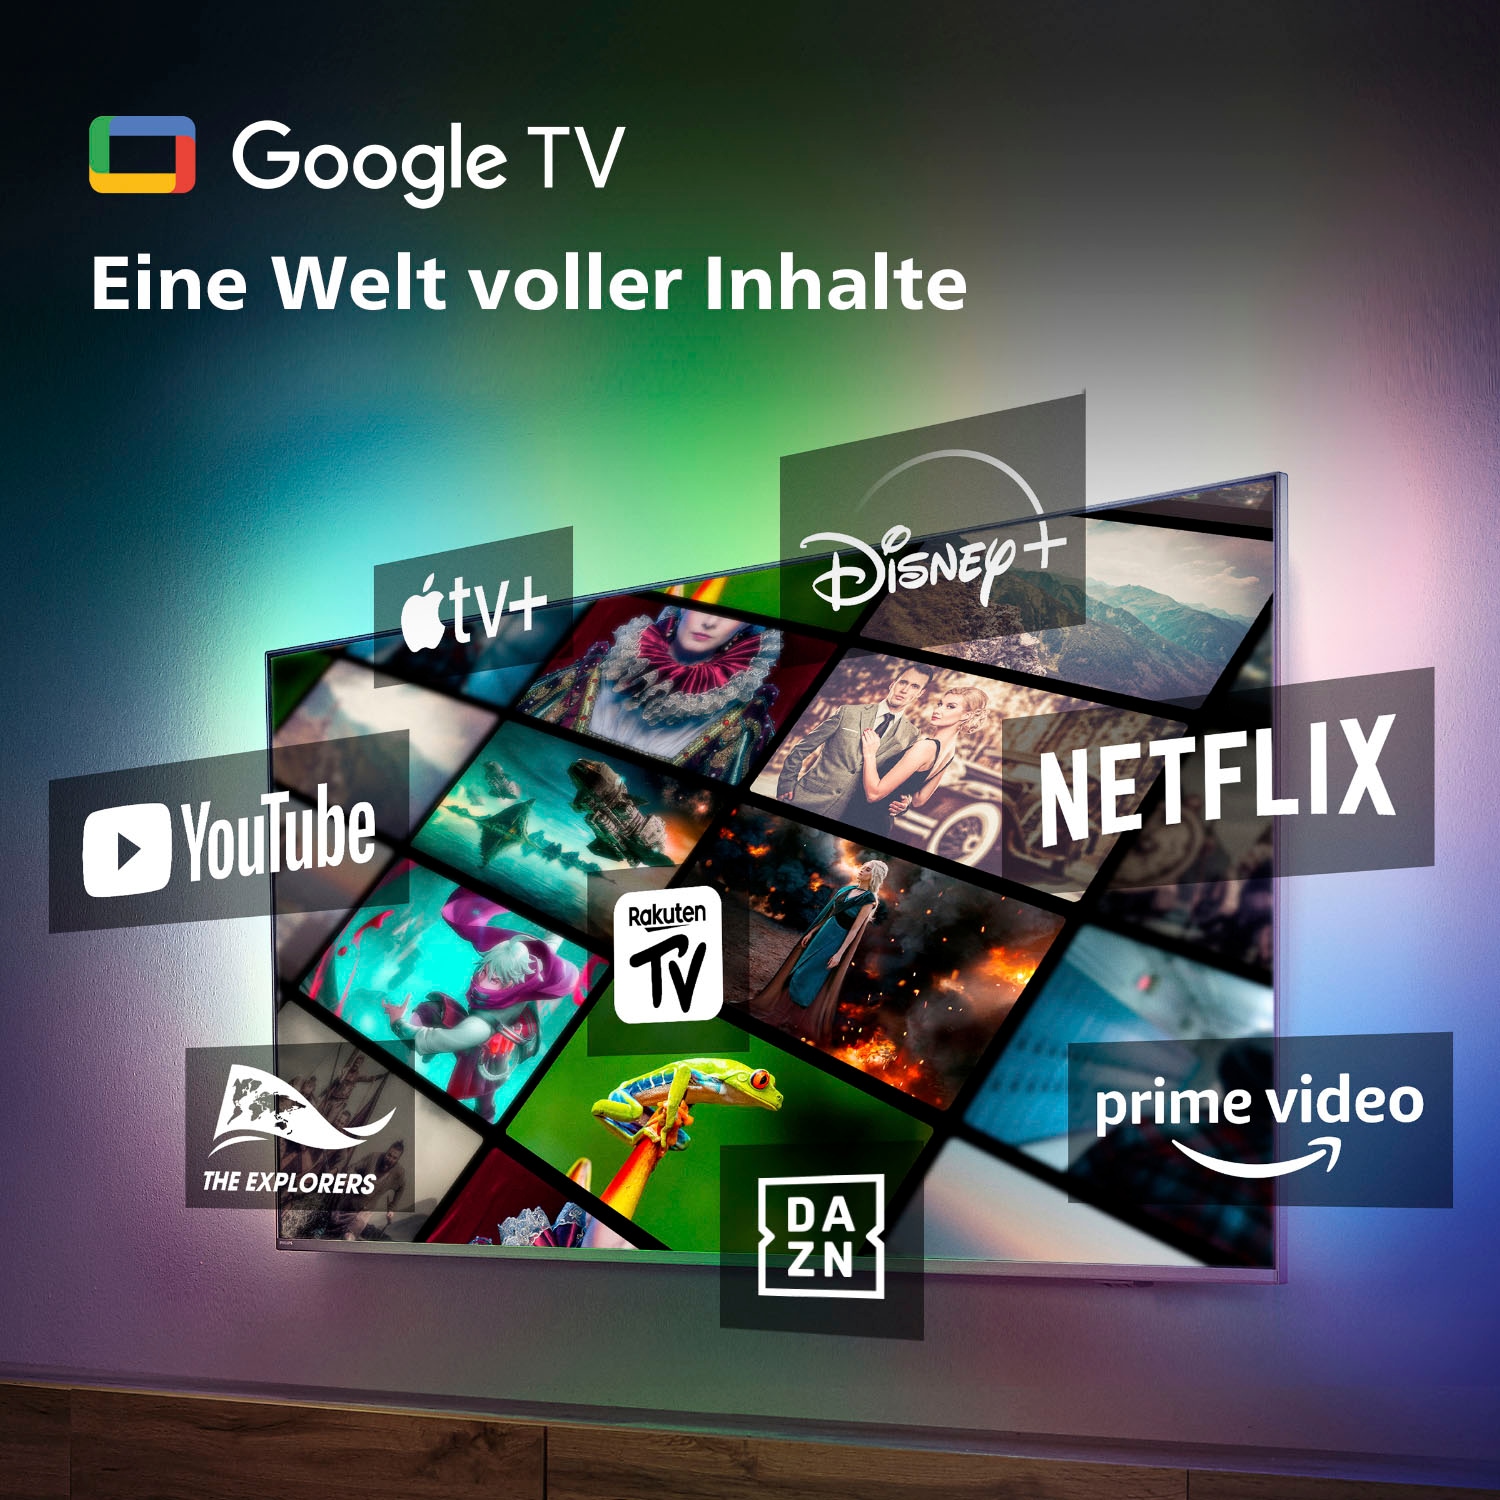 Philips LED-Fernseher, 164 cm/65 Zoll, 4K Ultra HD, Android TV-Google TV-Smart-TV, 3-seitiges Ambilight